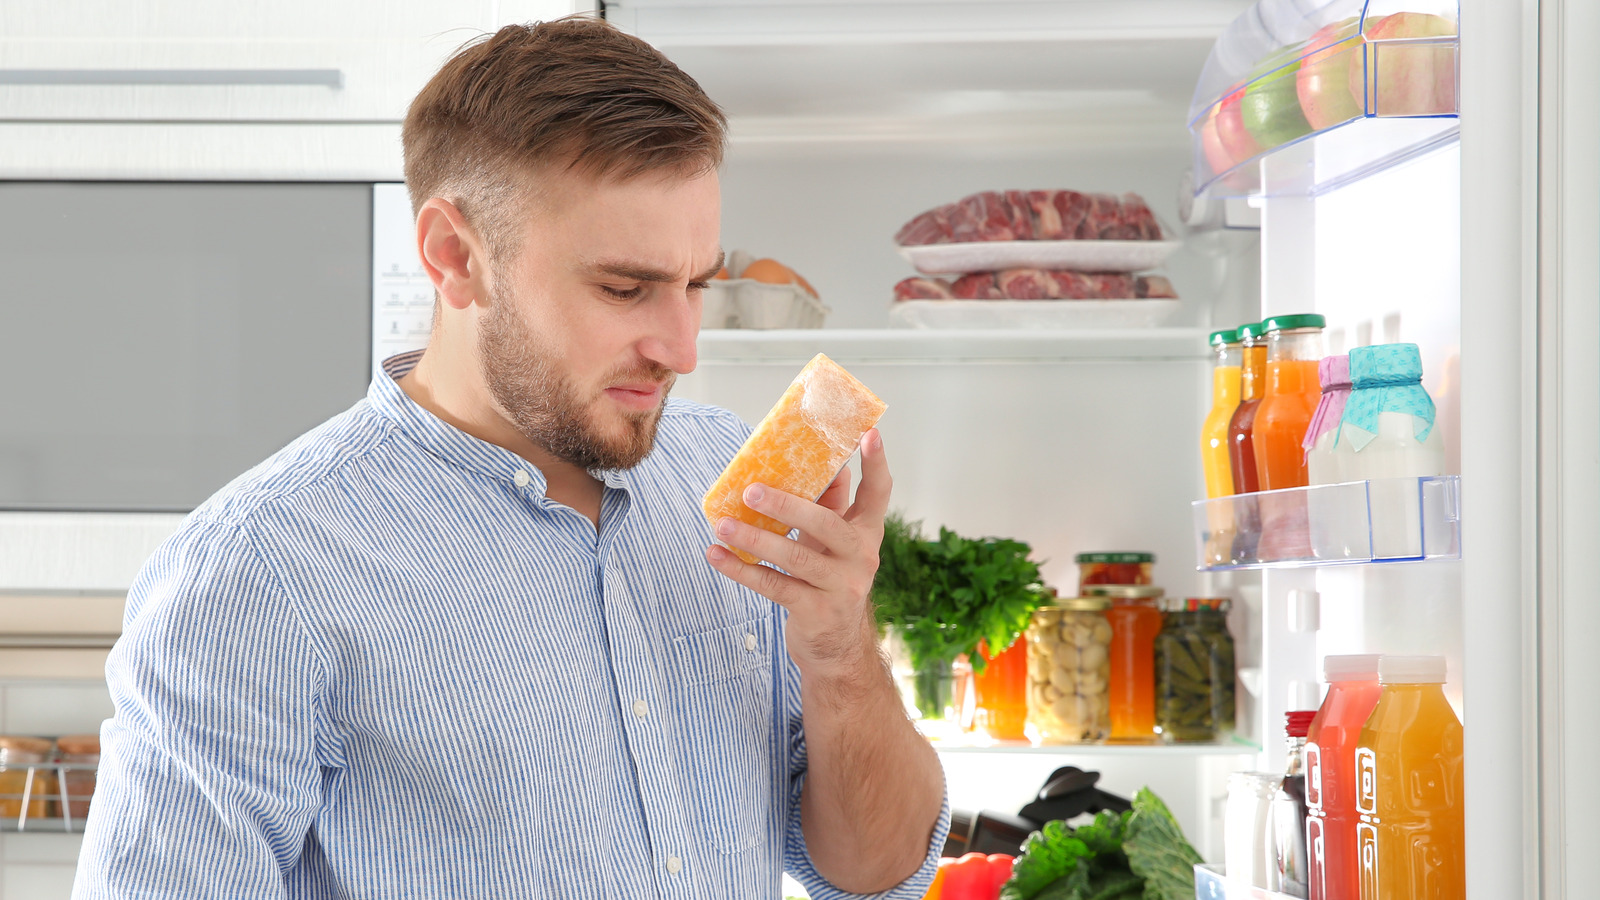 How bad is it to eat moldy cheese?